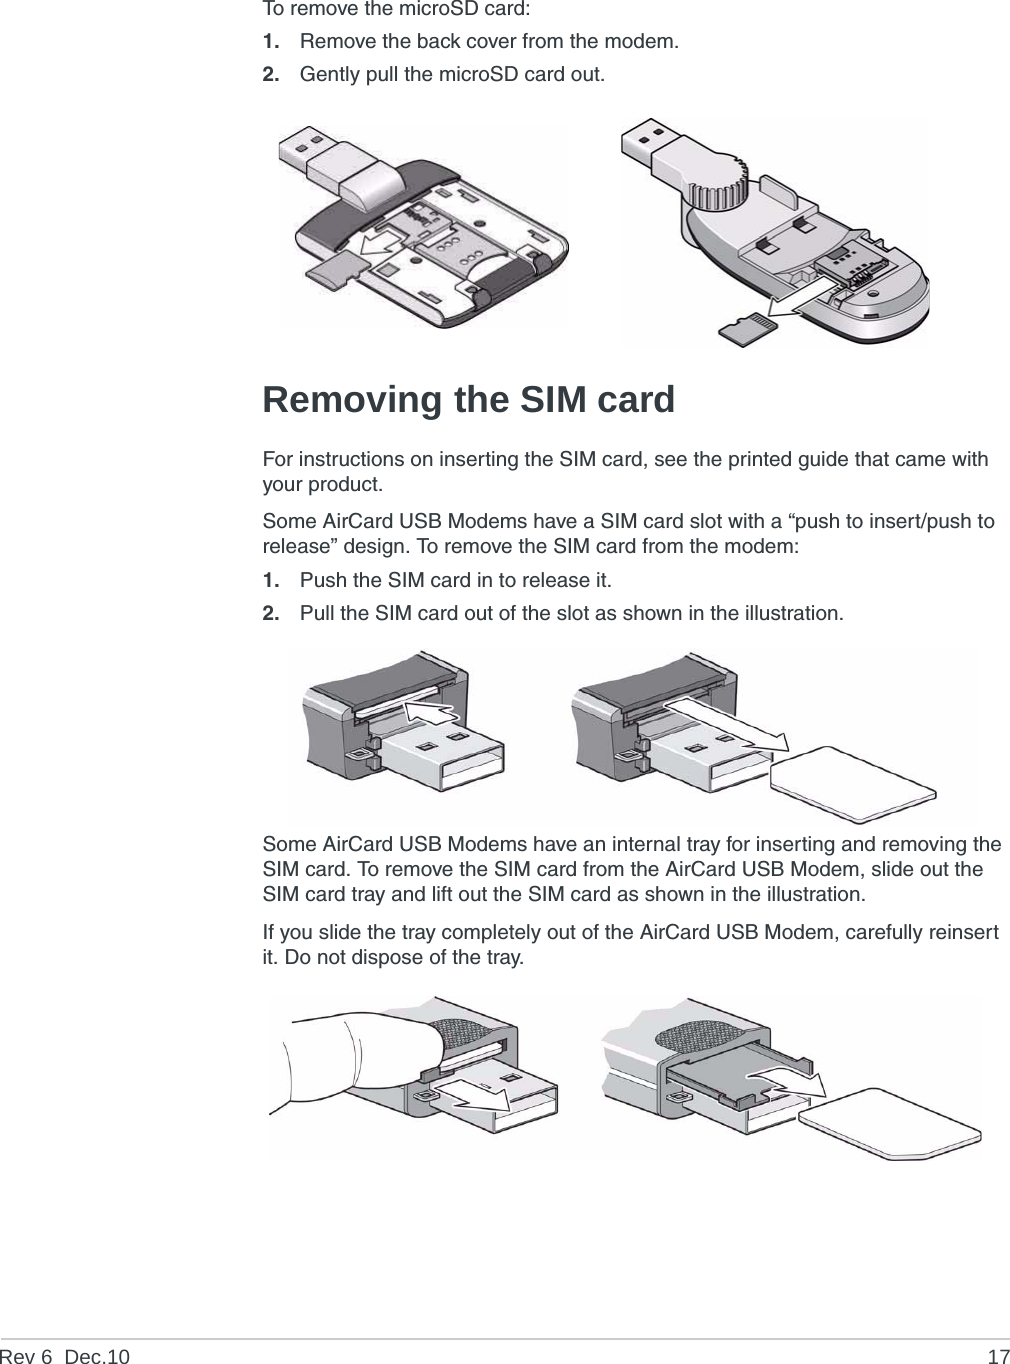 Rev 6  Dec.10 17To remove the microSD card:1. Remove the back cover from the modem.2. Gently pull the microSD card out.Removing the SIM cardFor instructions on inserting the SIM card, see the printed guide that came with your product.Some AirCard USB Modems have a SIM card slot with a “push to insert/push to release” design. To remove the SIM card from the modem:1. Push the SIM card in to release it.2. Pull the SIM card out of the slot as shown in the illustration.Some AirCard USB Modems have an internal tray for inserting and removing the SIM card. To remove the SIM card from the AirCard USB Modem, slide out the SIM card tray and lift out the SIM card as shown in the illustration.If you slide the tray completely out of the AirCard USB Modem, carefully reinsert it. Do not dispose of the tray.